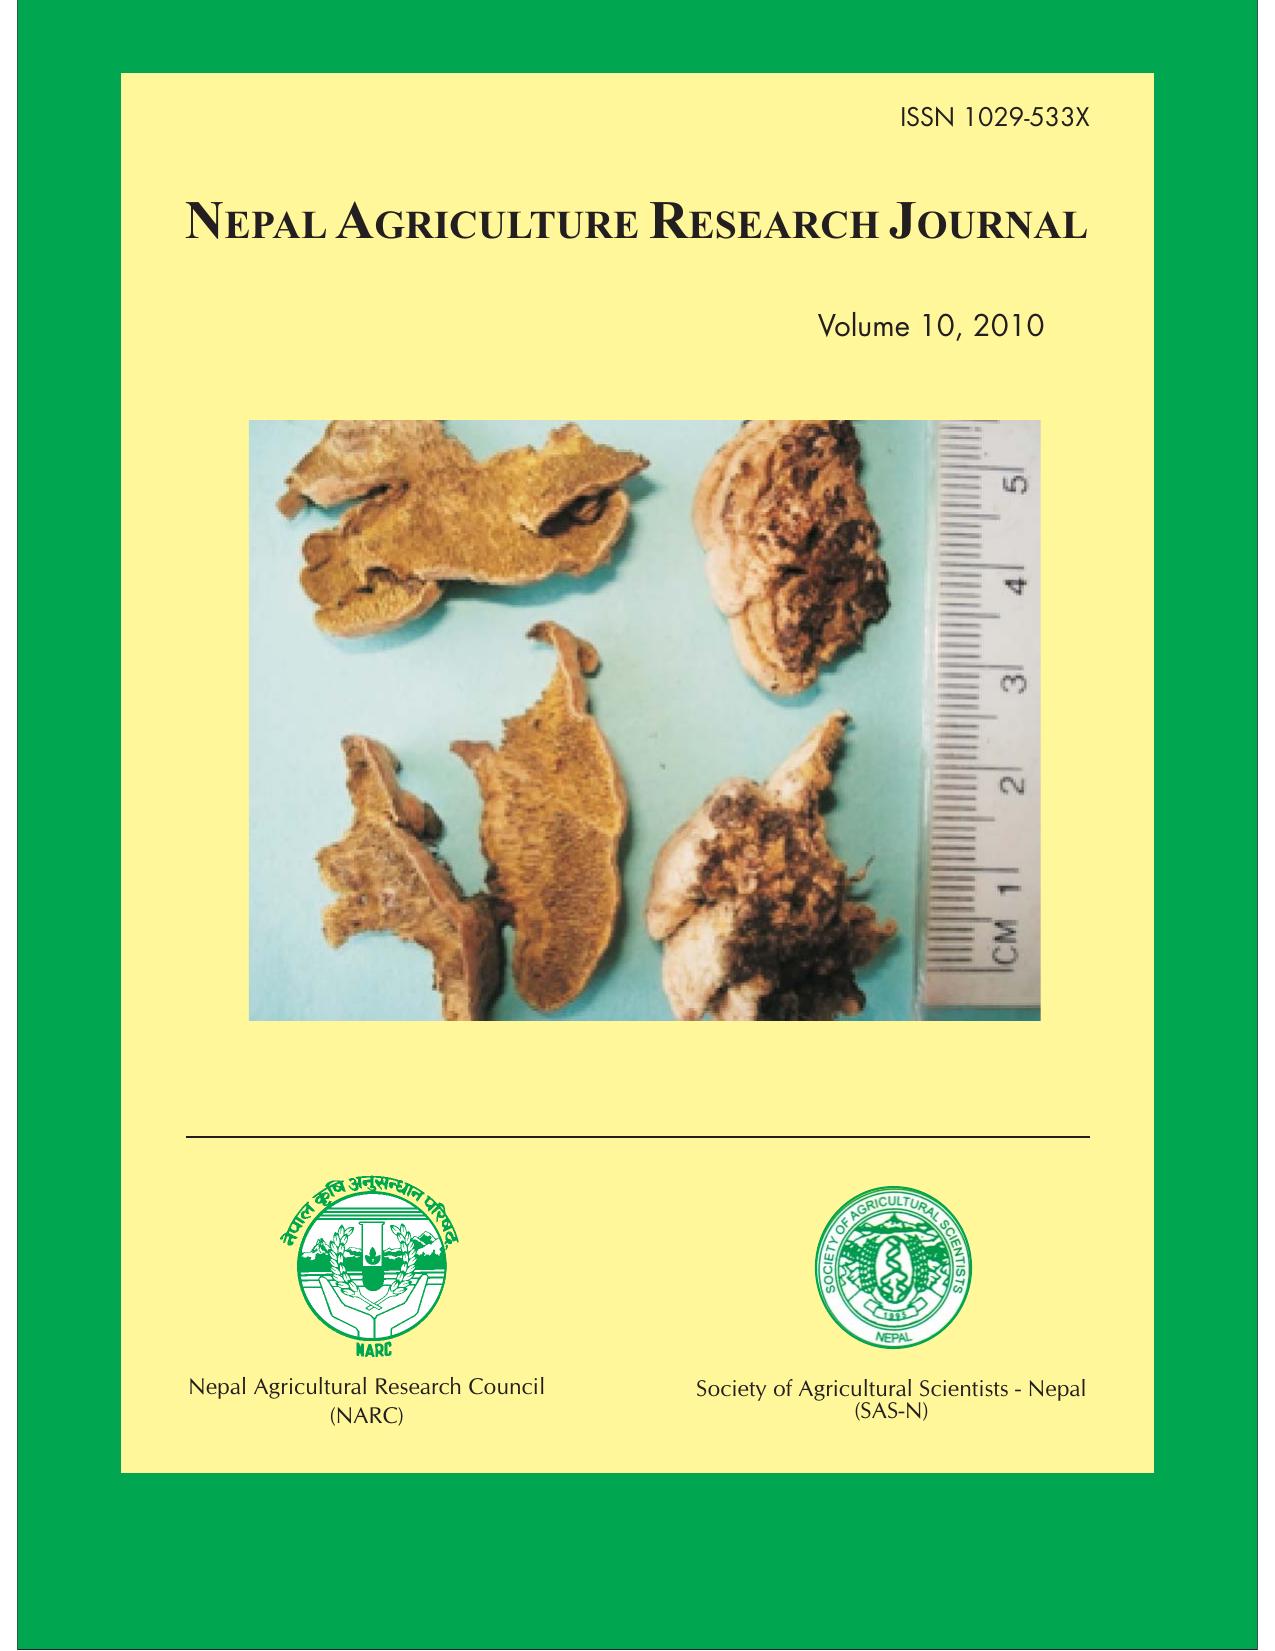 Nepal Agriculture Research Journal Vol10